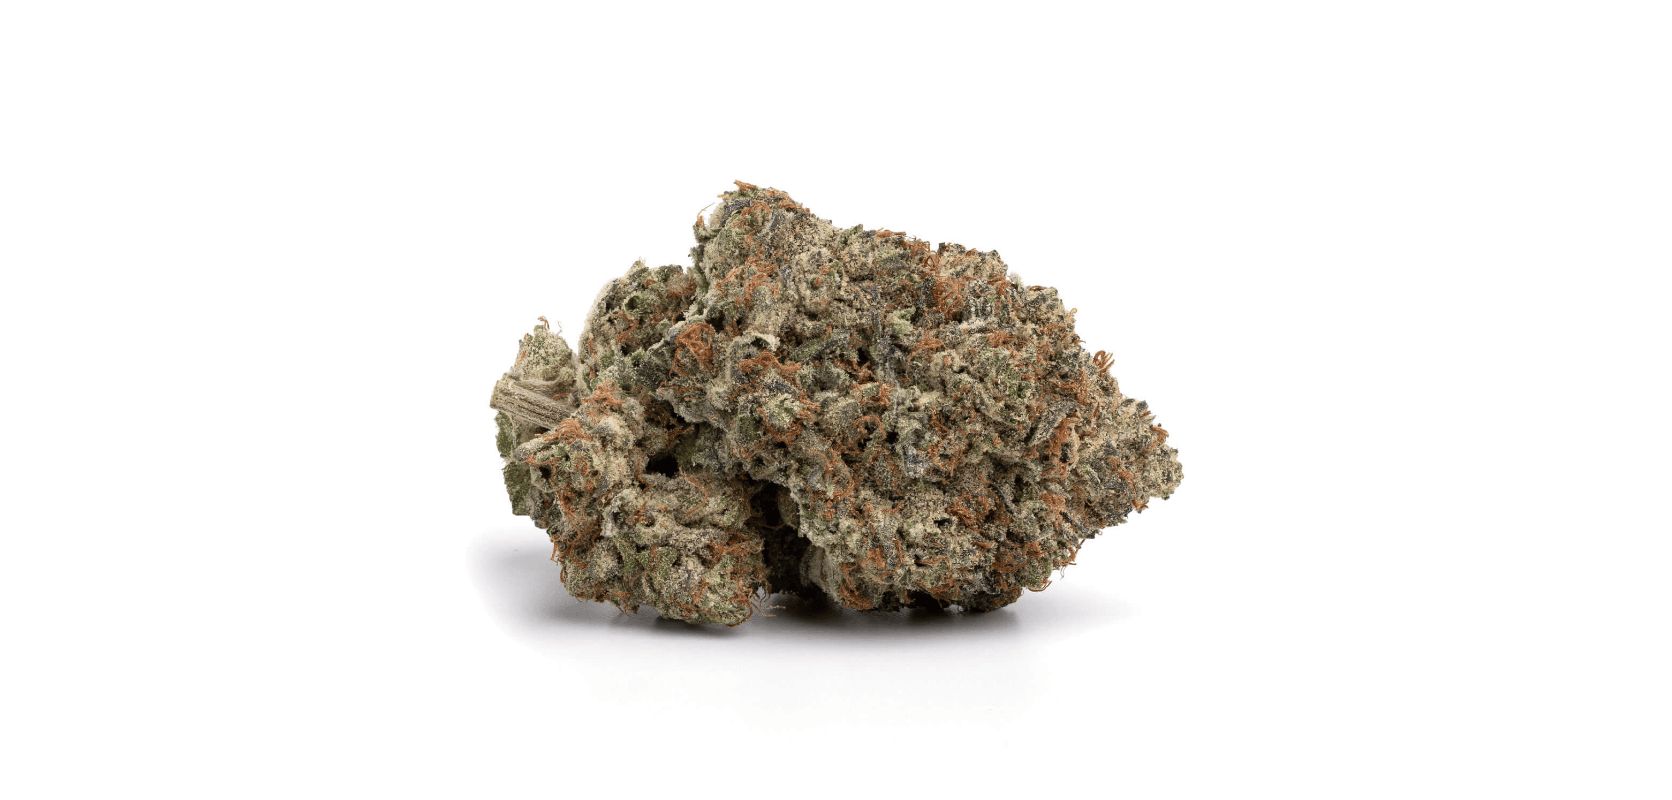 We're discussing the Pink Rockstar strain, a delicious Indica hybrid with a diesel, pine, sweet, spicy, and floral taste. 